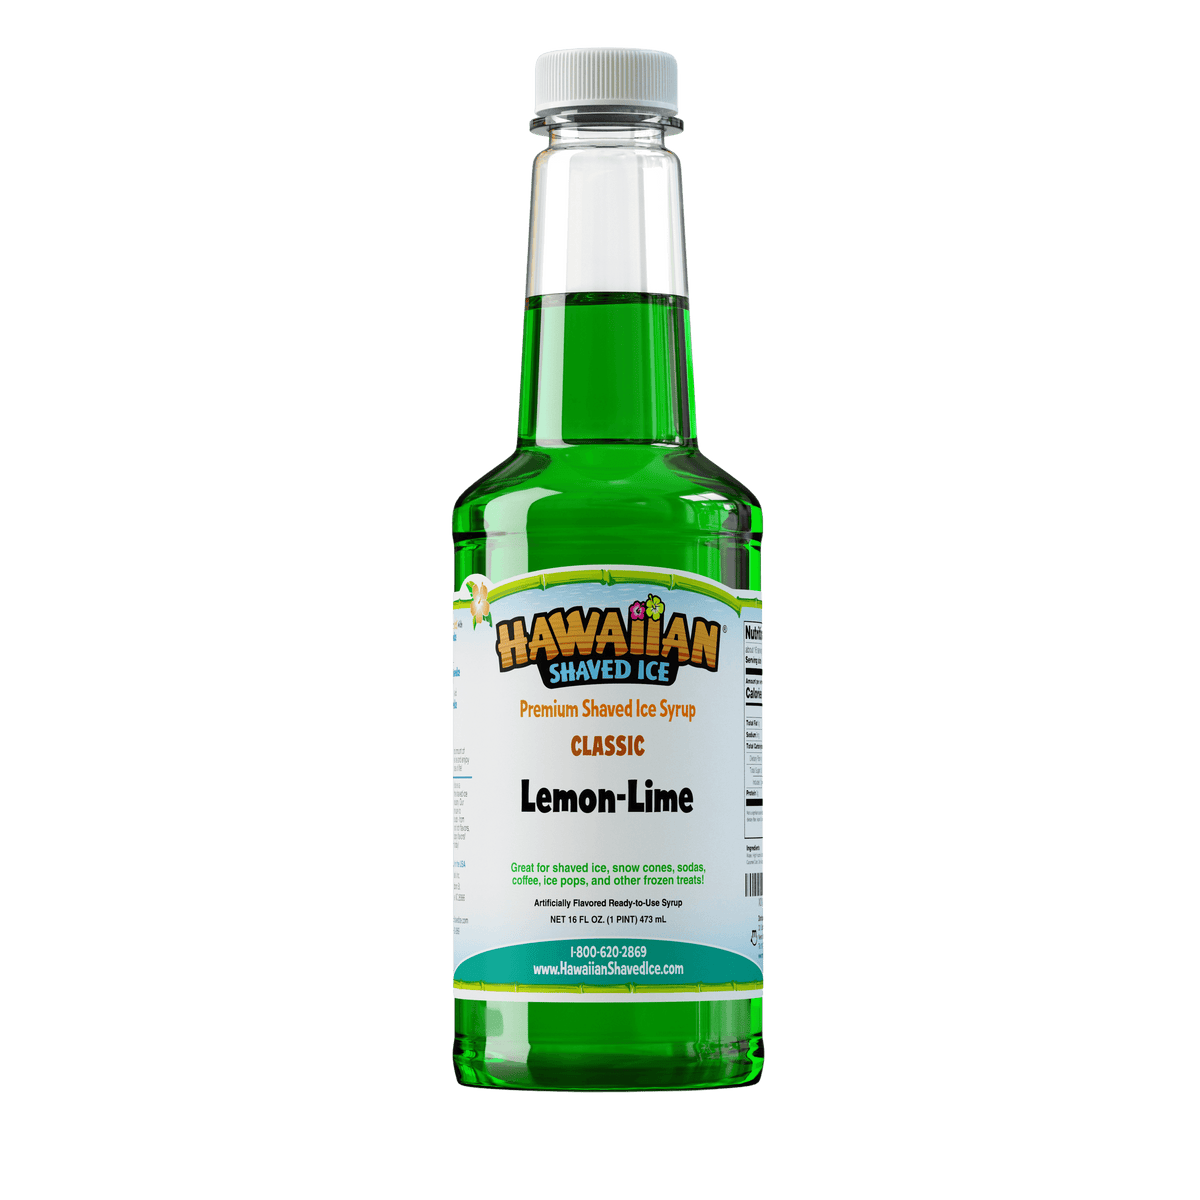 A pint (16-oz) of Hawaiian Shaved Ice Lemon-Lime Flavored syrup, Green